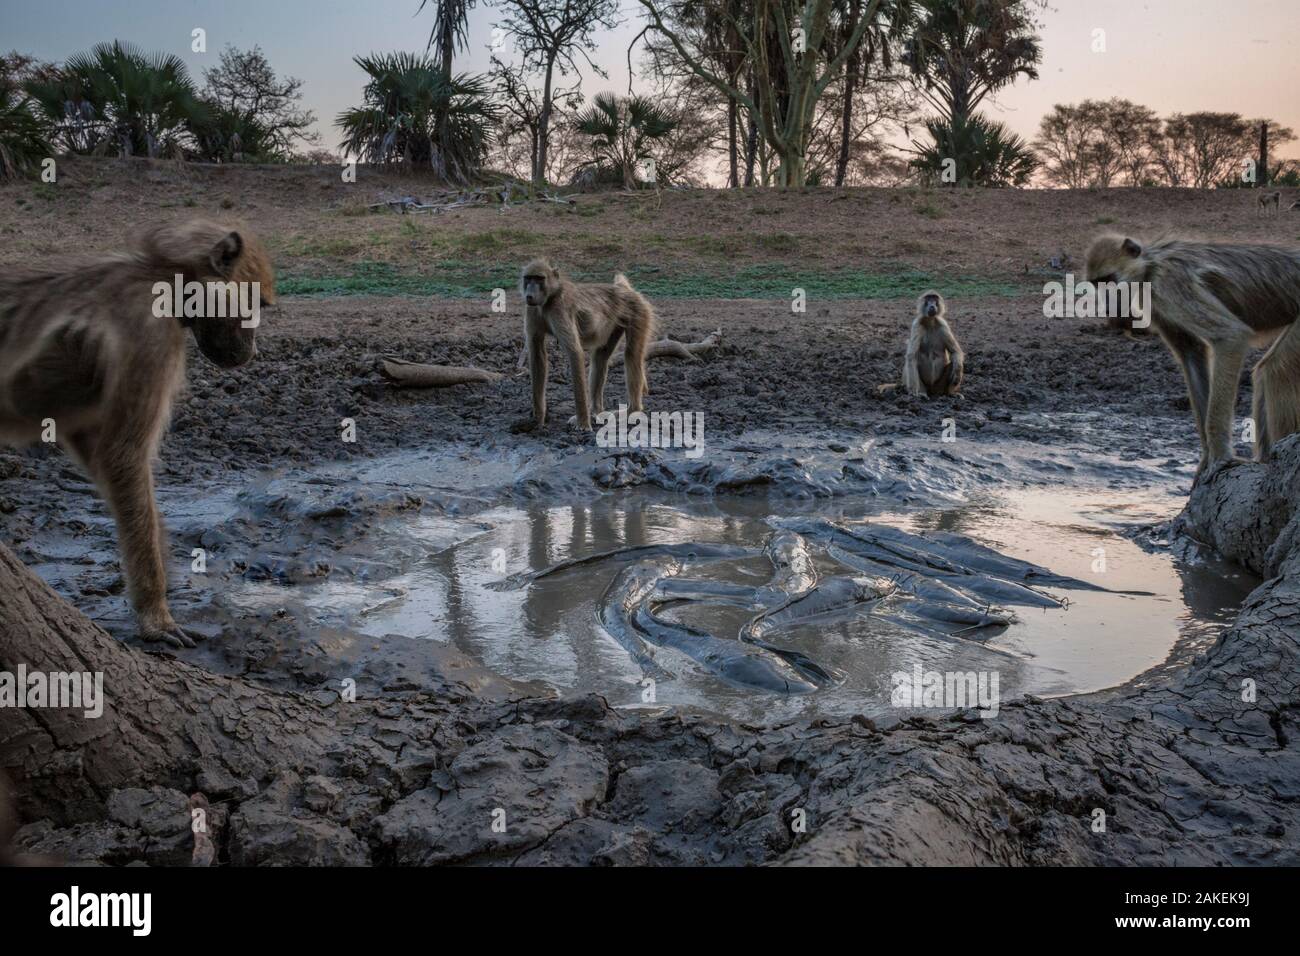 Baboons (Papio sp) watching Sharpooth catfish (Clarias gariepinus) trapped in last puddle of  water, Mussicadzi River during the dry season, Gorongosa National Park, Mozambique. Stock Photo